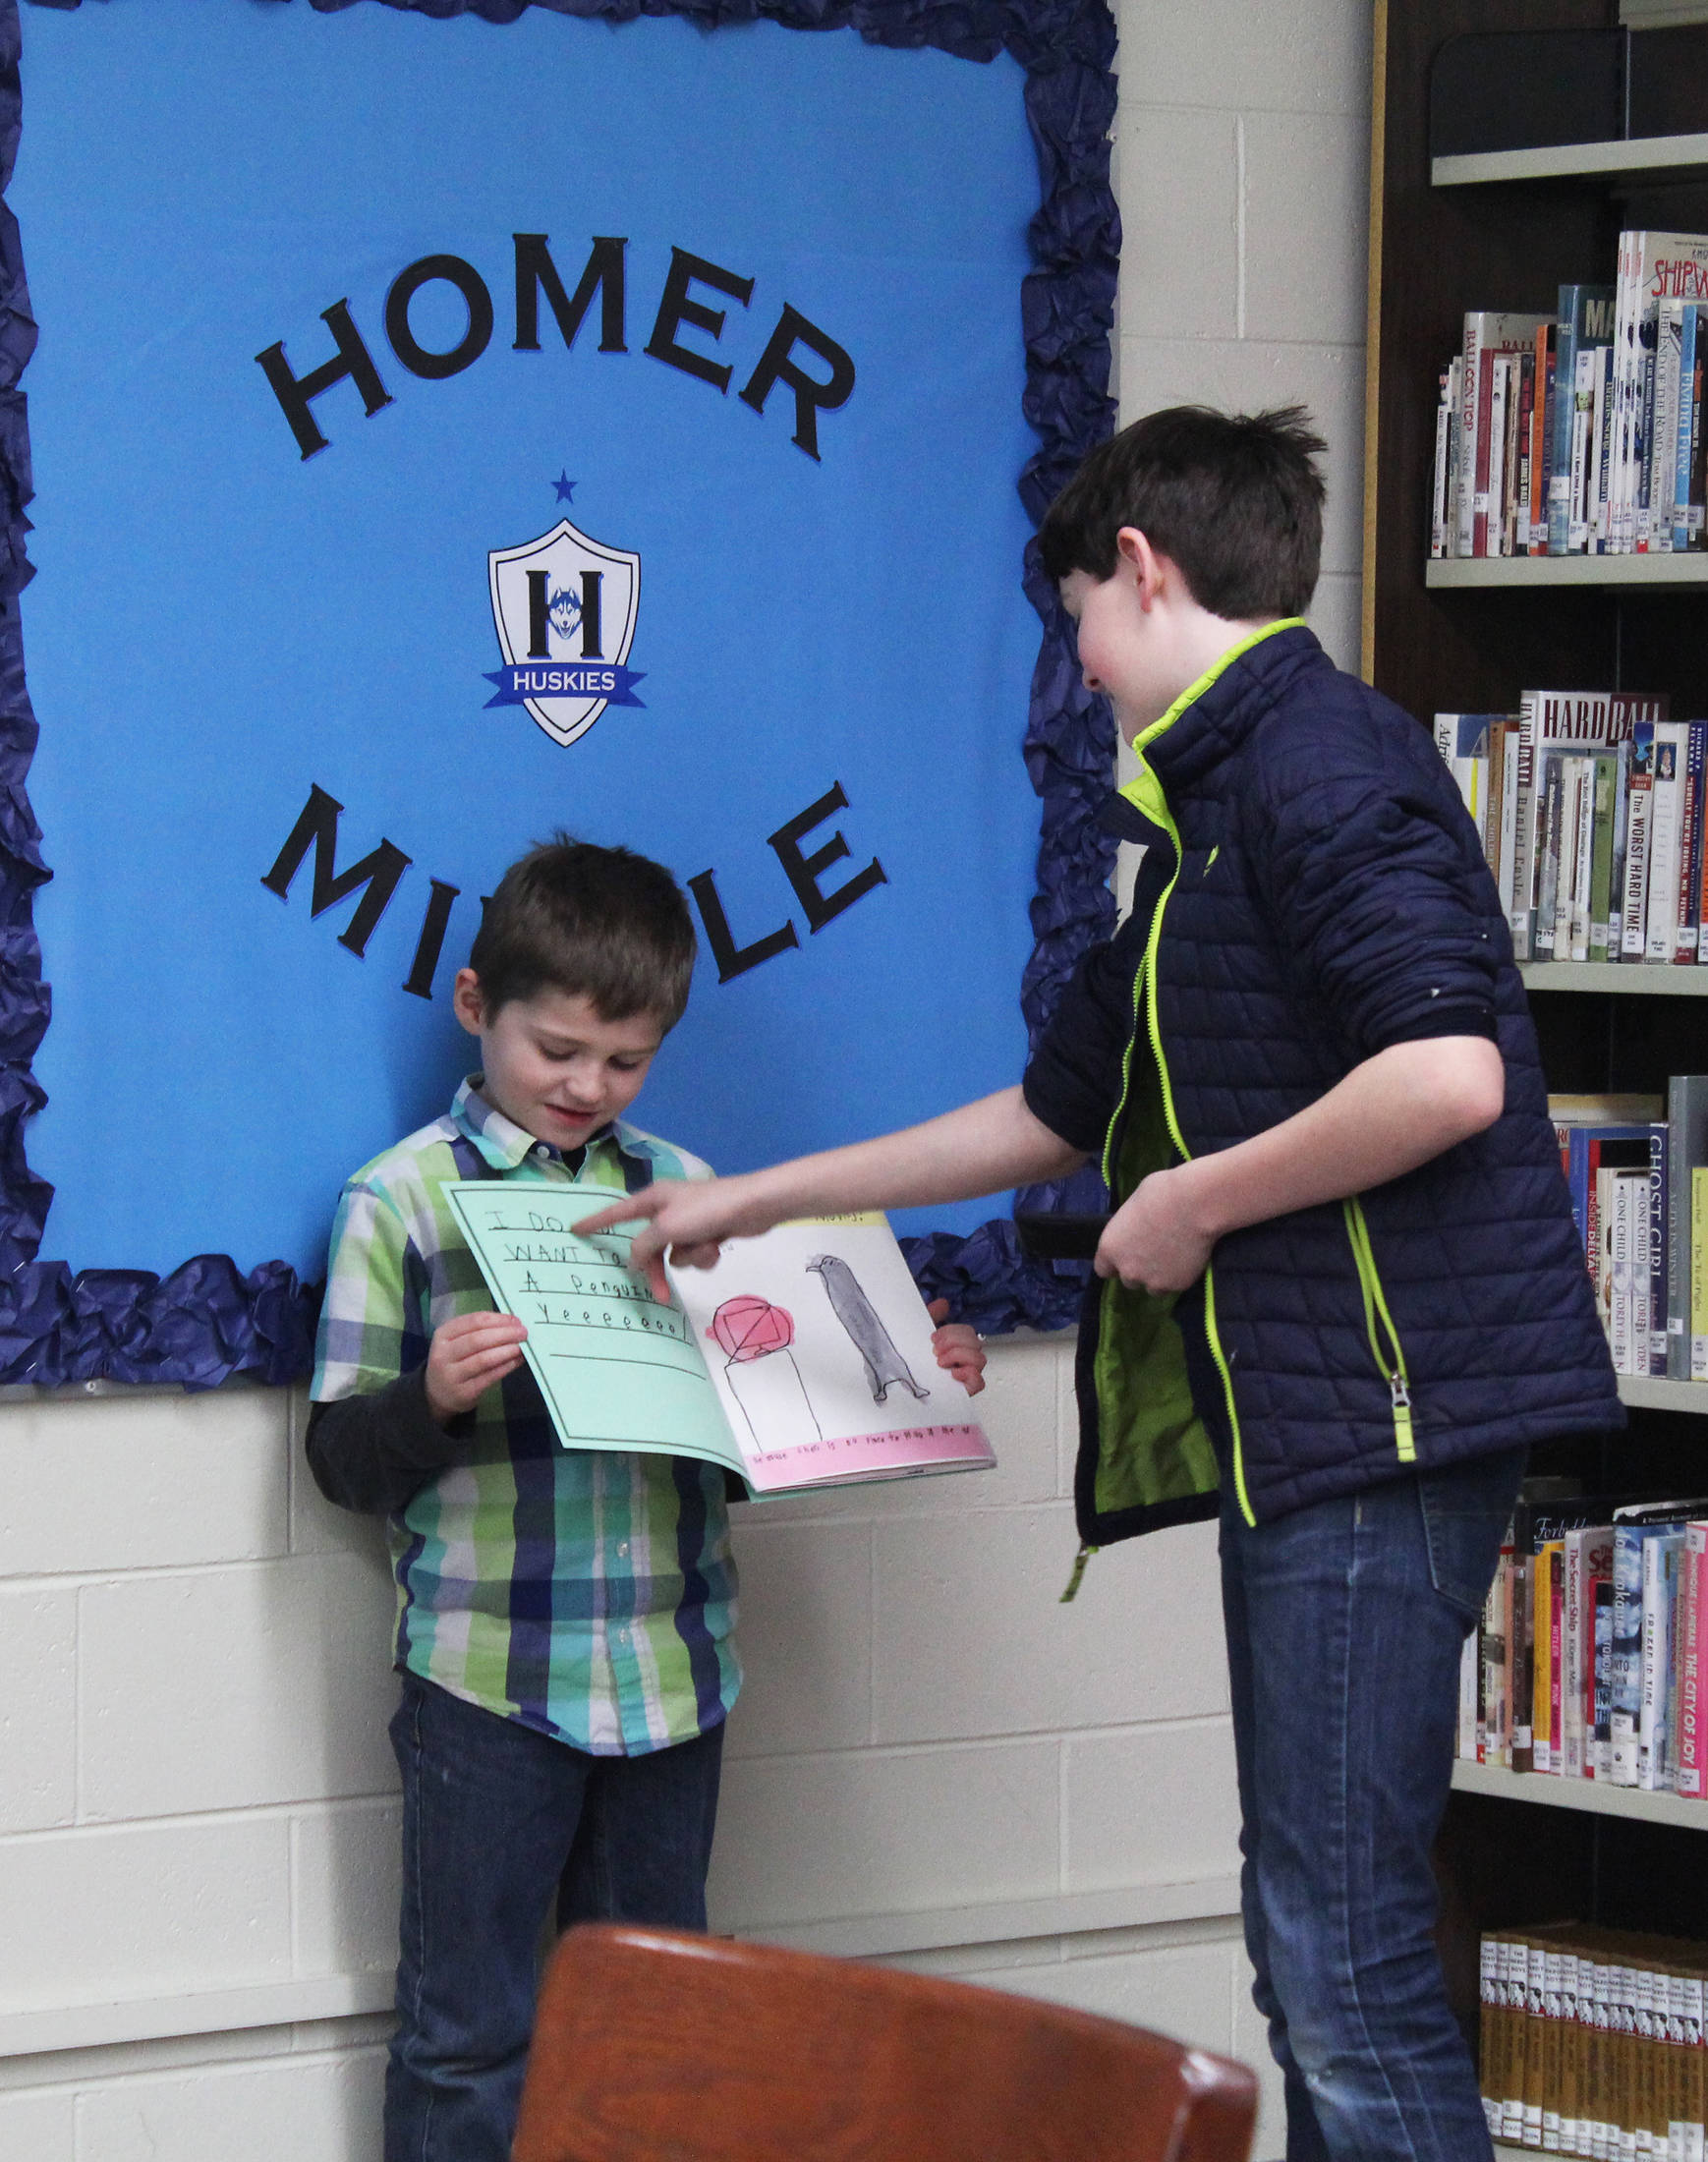 Homer Middle School seventh grader Benjamin Dinges helps Paul Banks Elementary School first grader Adrian Reutov perform a reading of a book they worked on together during a mentor program Friday, Feb. 2, 2018 at Homer Middle School. (Photo by Megan Pacer/Homer News)